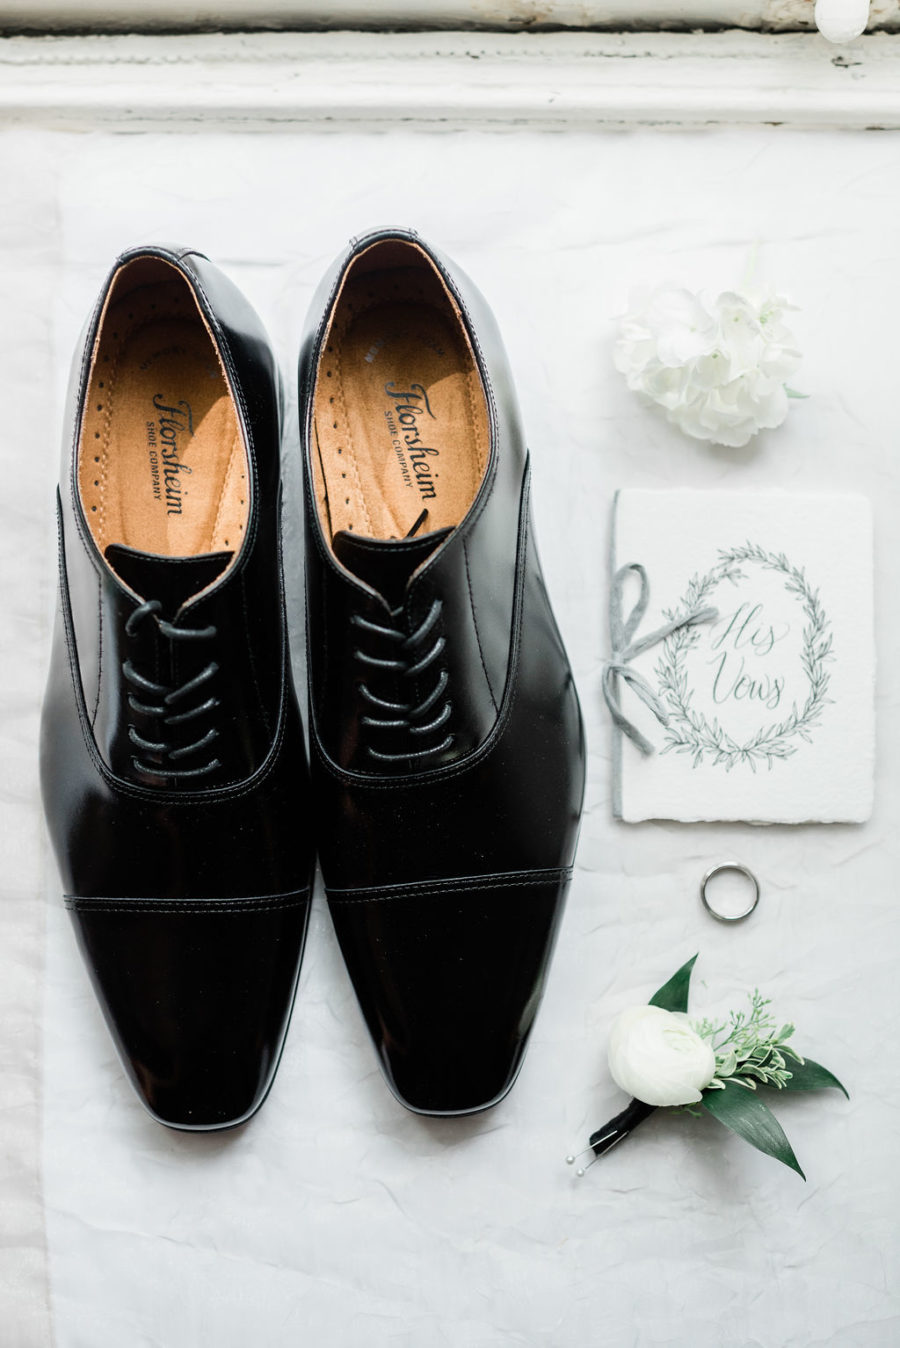 Grooms wedding shoes for Riverwood Mansion wedding captured by Maria Gloer Photography